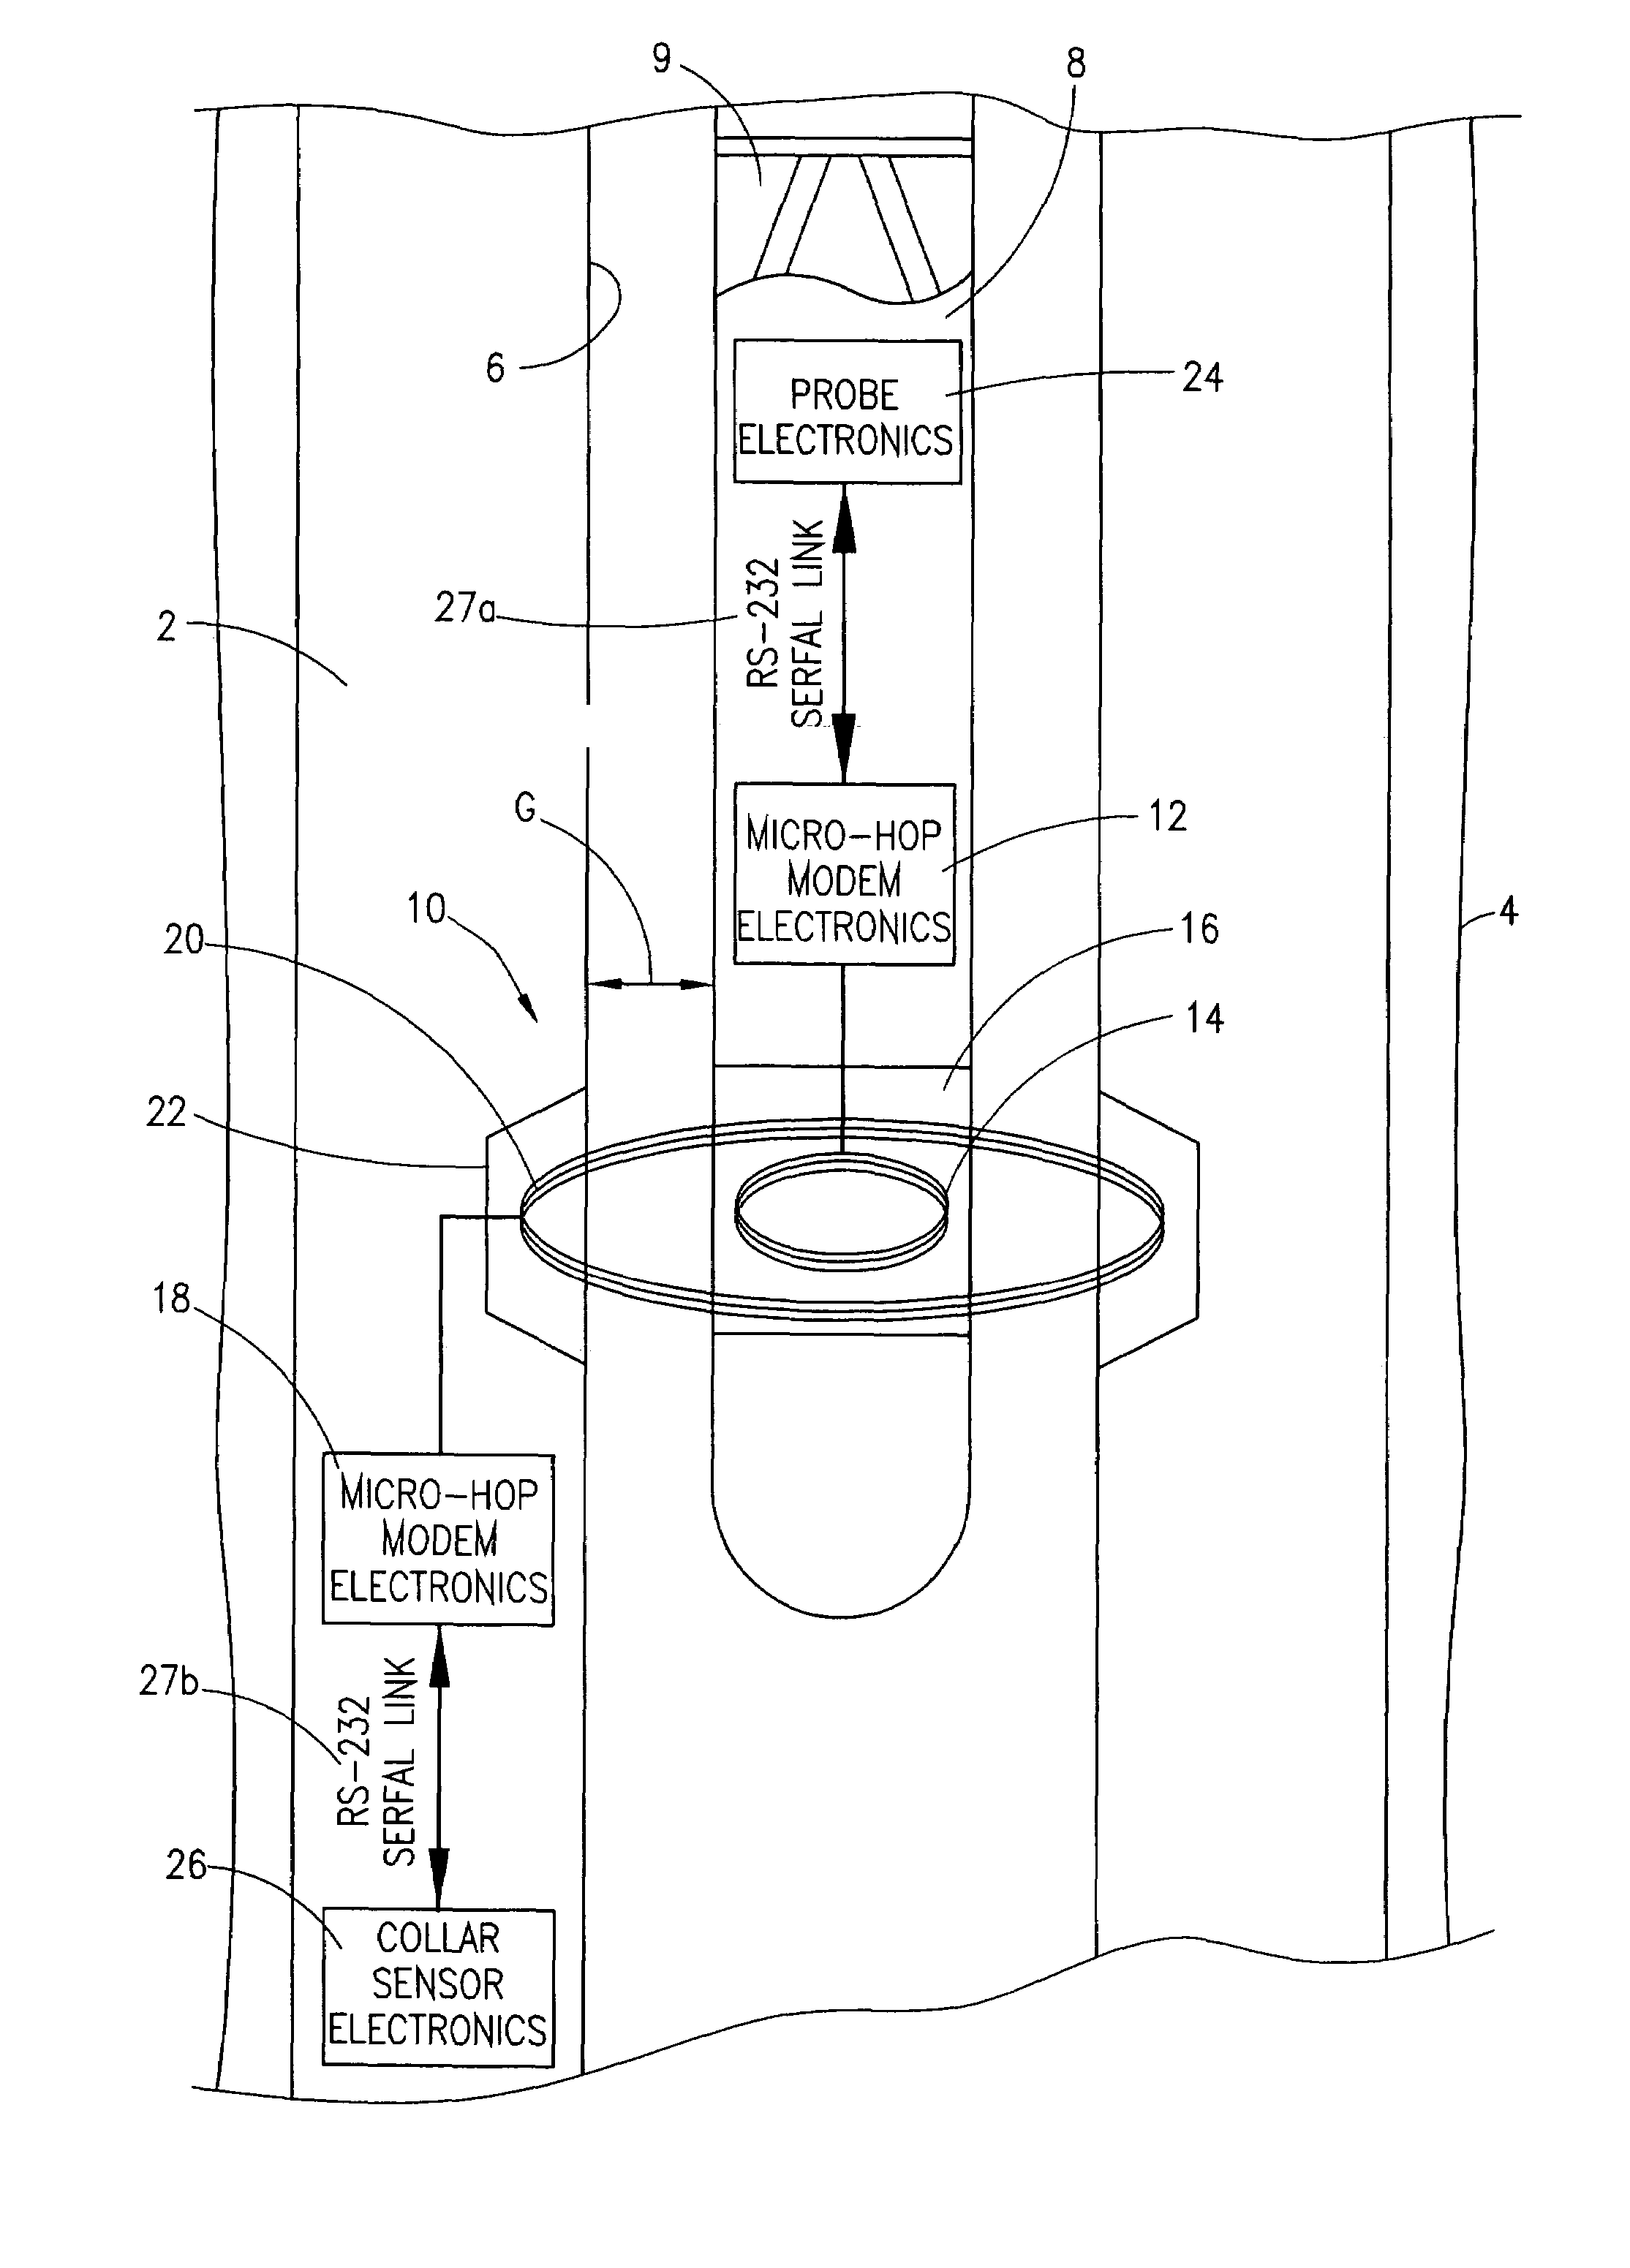 Apparatus and method for providing communication between a probe and a sensor